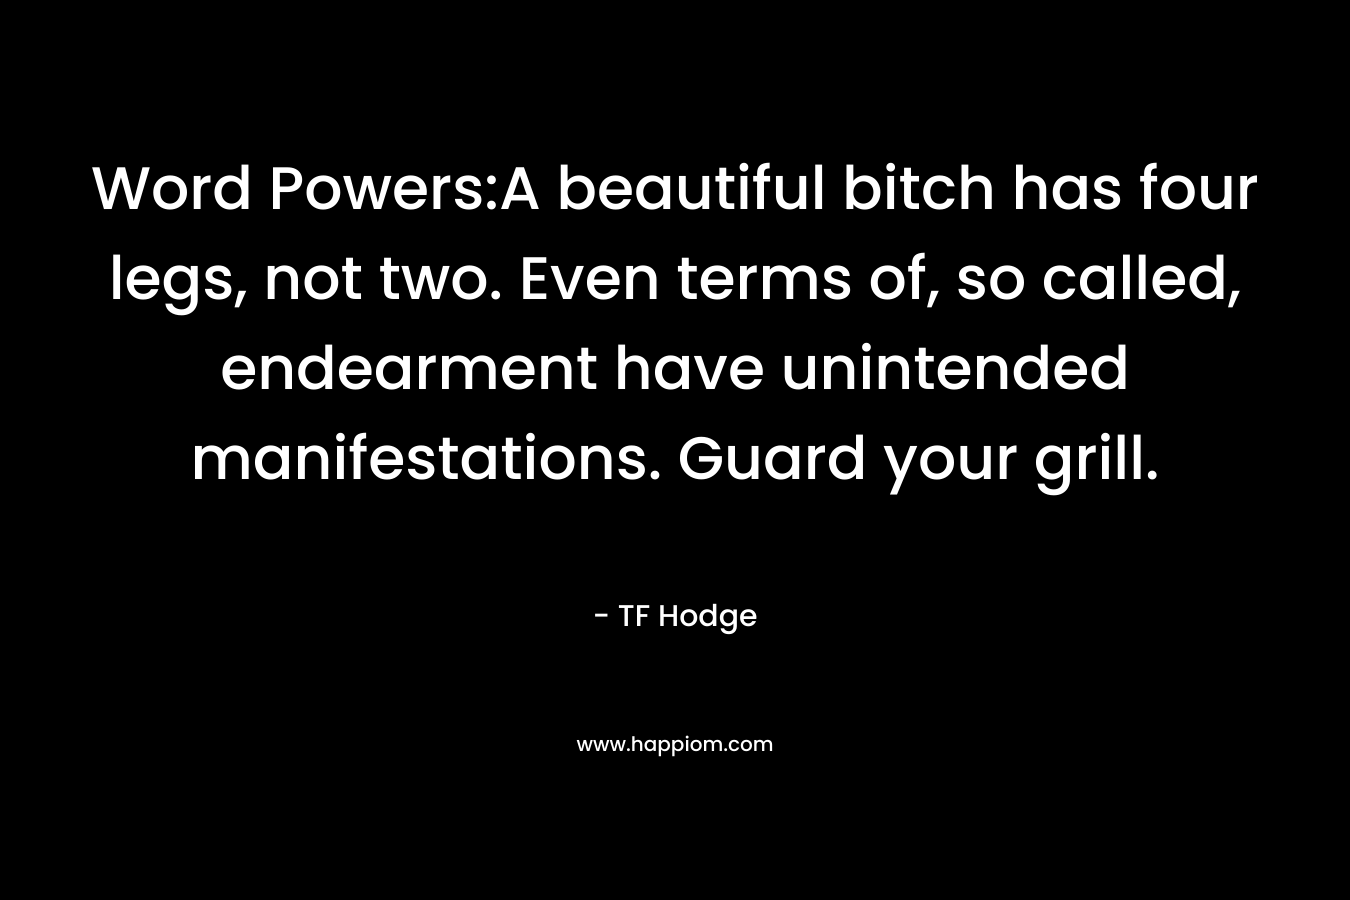 Word Powers:A beautiful bitch has four legs, not two. Even terms of, so called, endearment have unintended manifestations. Guard your grill. – TF Hodge